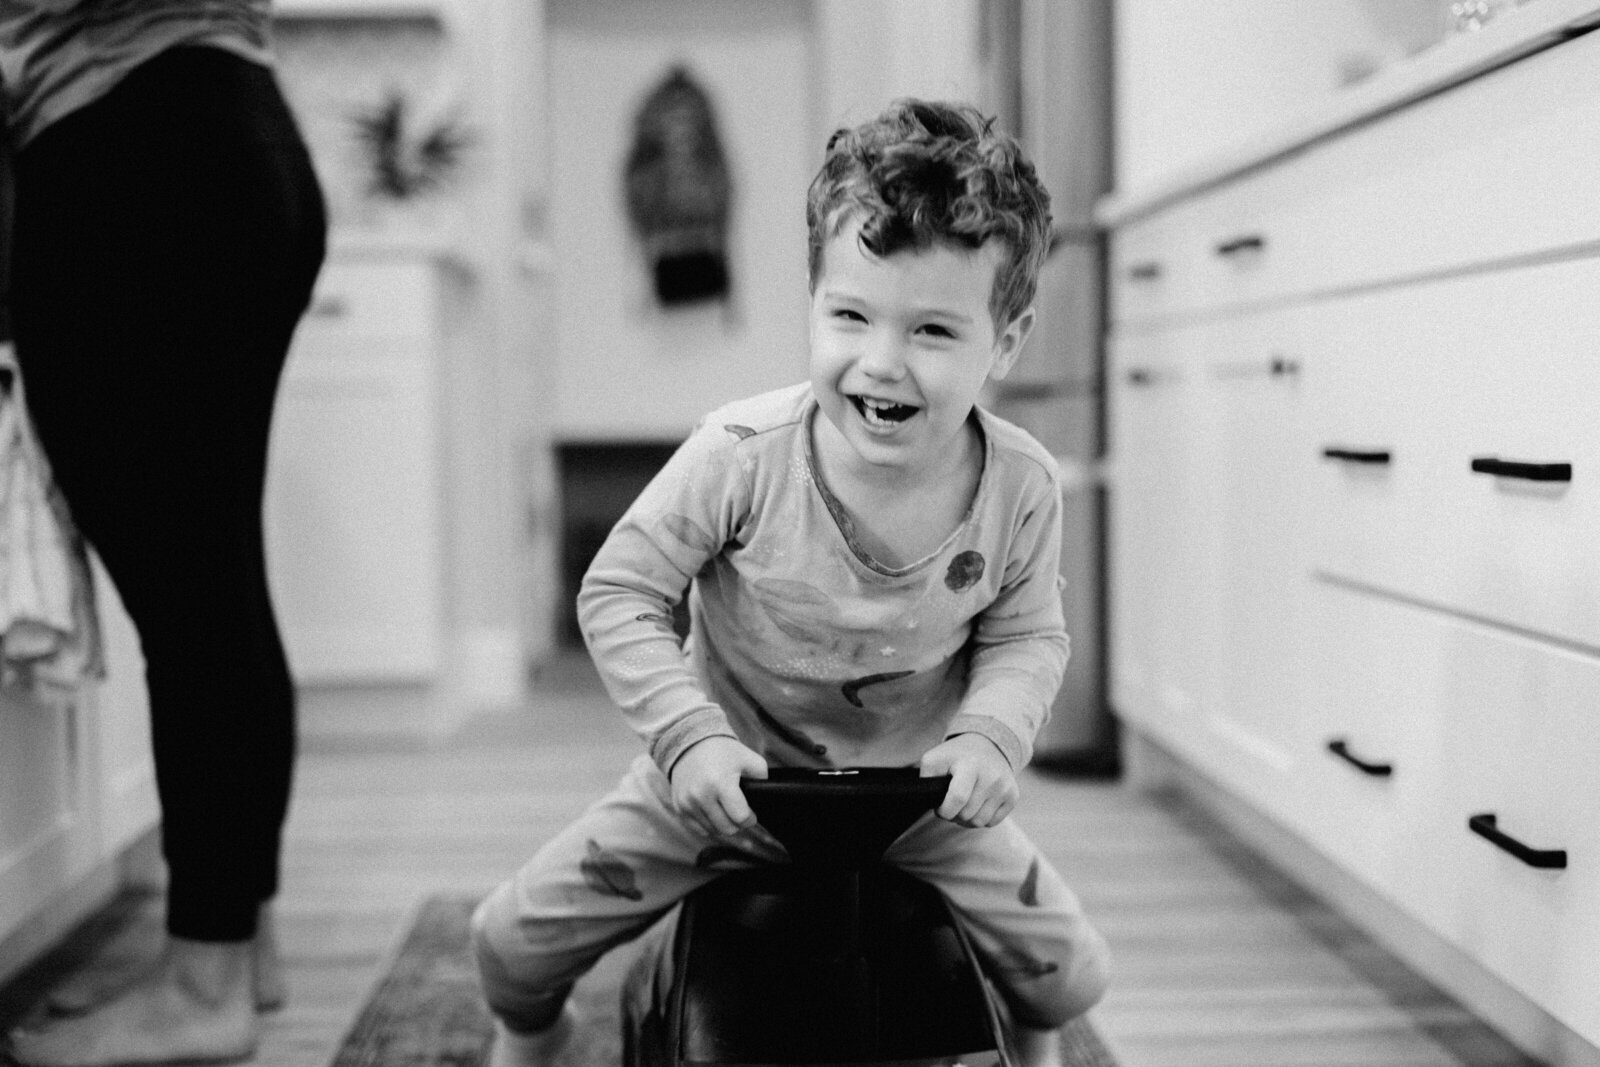 Little boy laughs as he rides a toy car through the kitchen